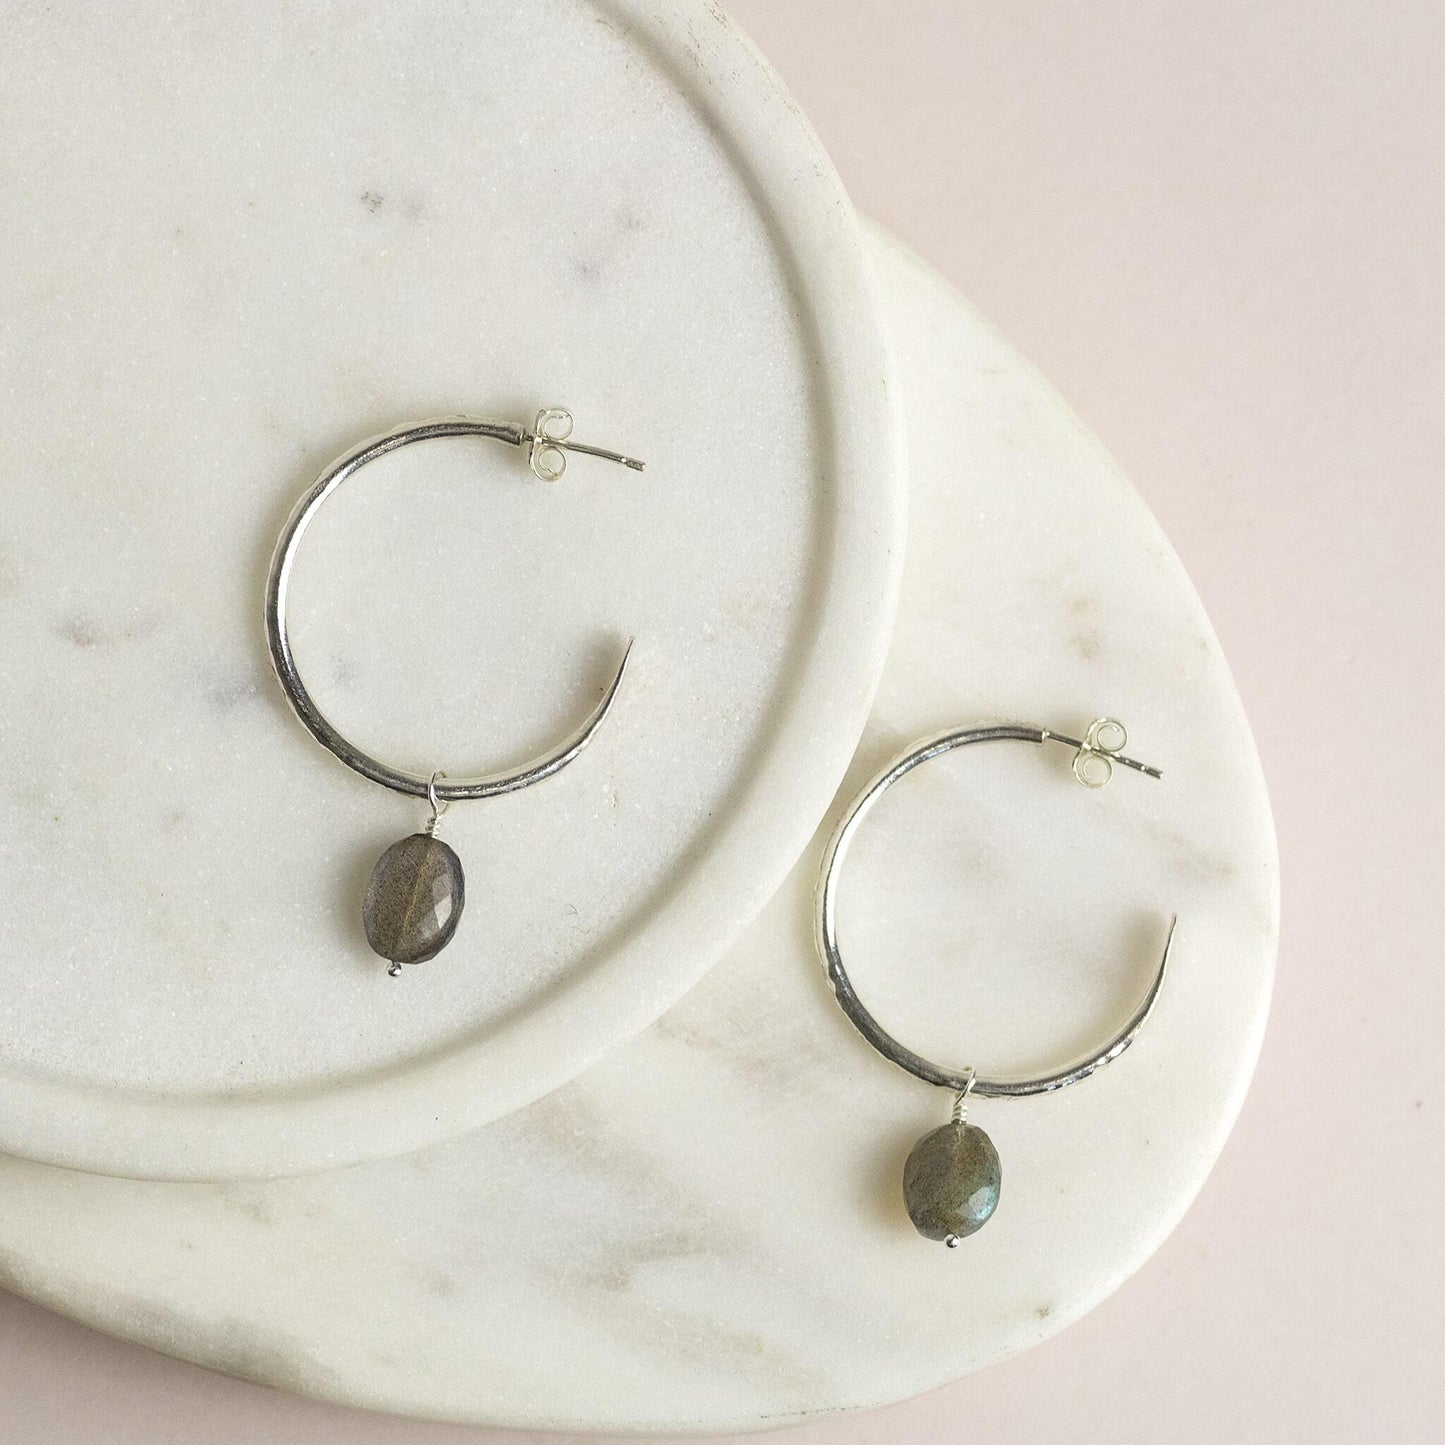 Small Silver Hoops with Labradorite - 3cm